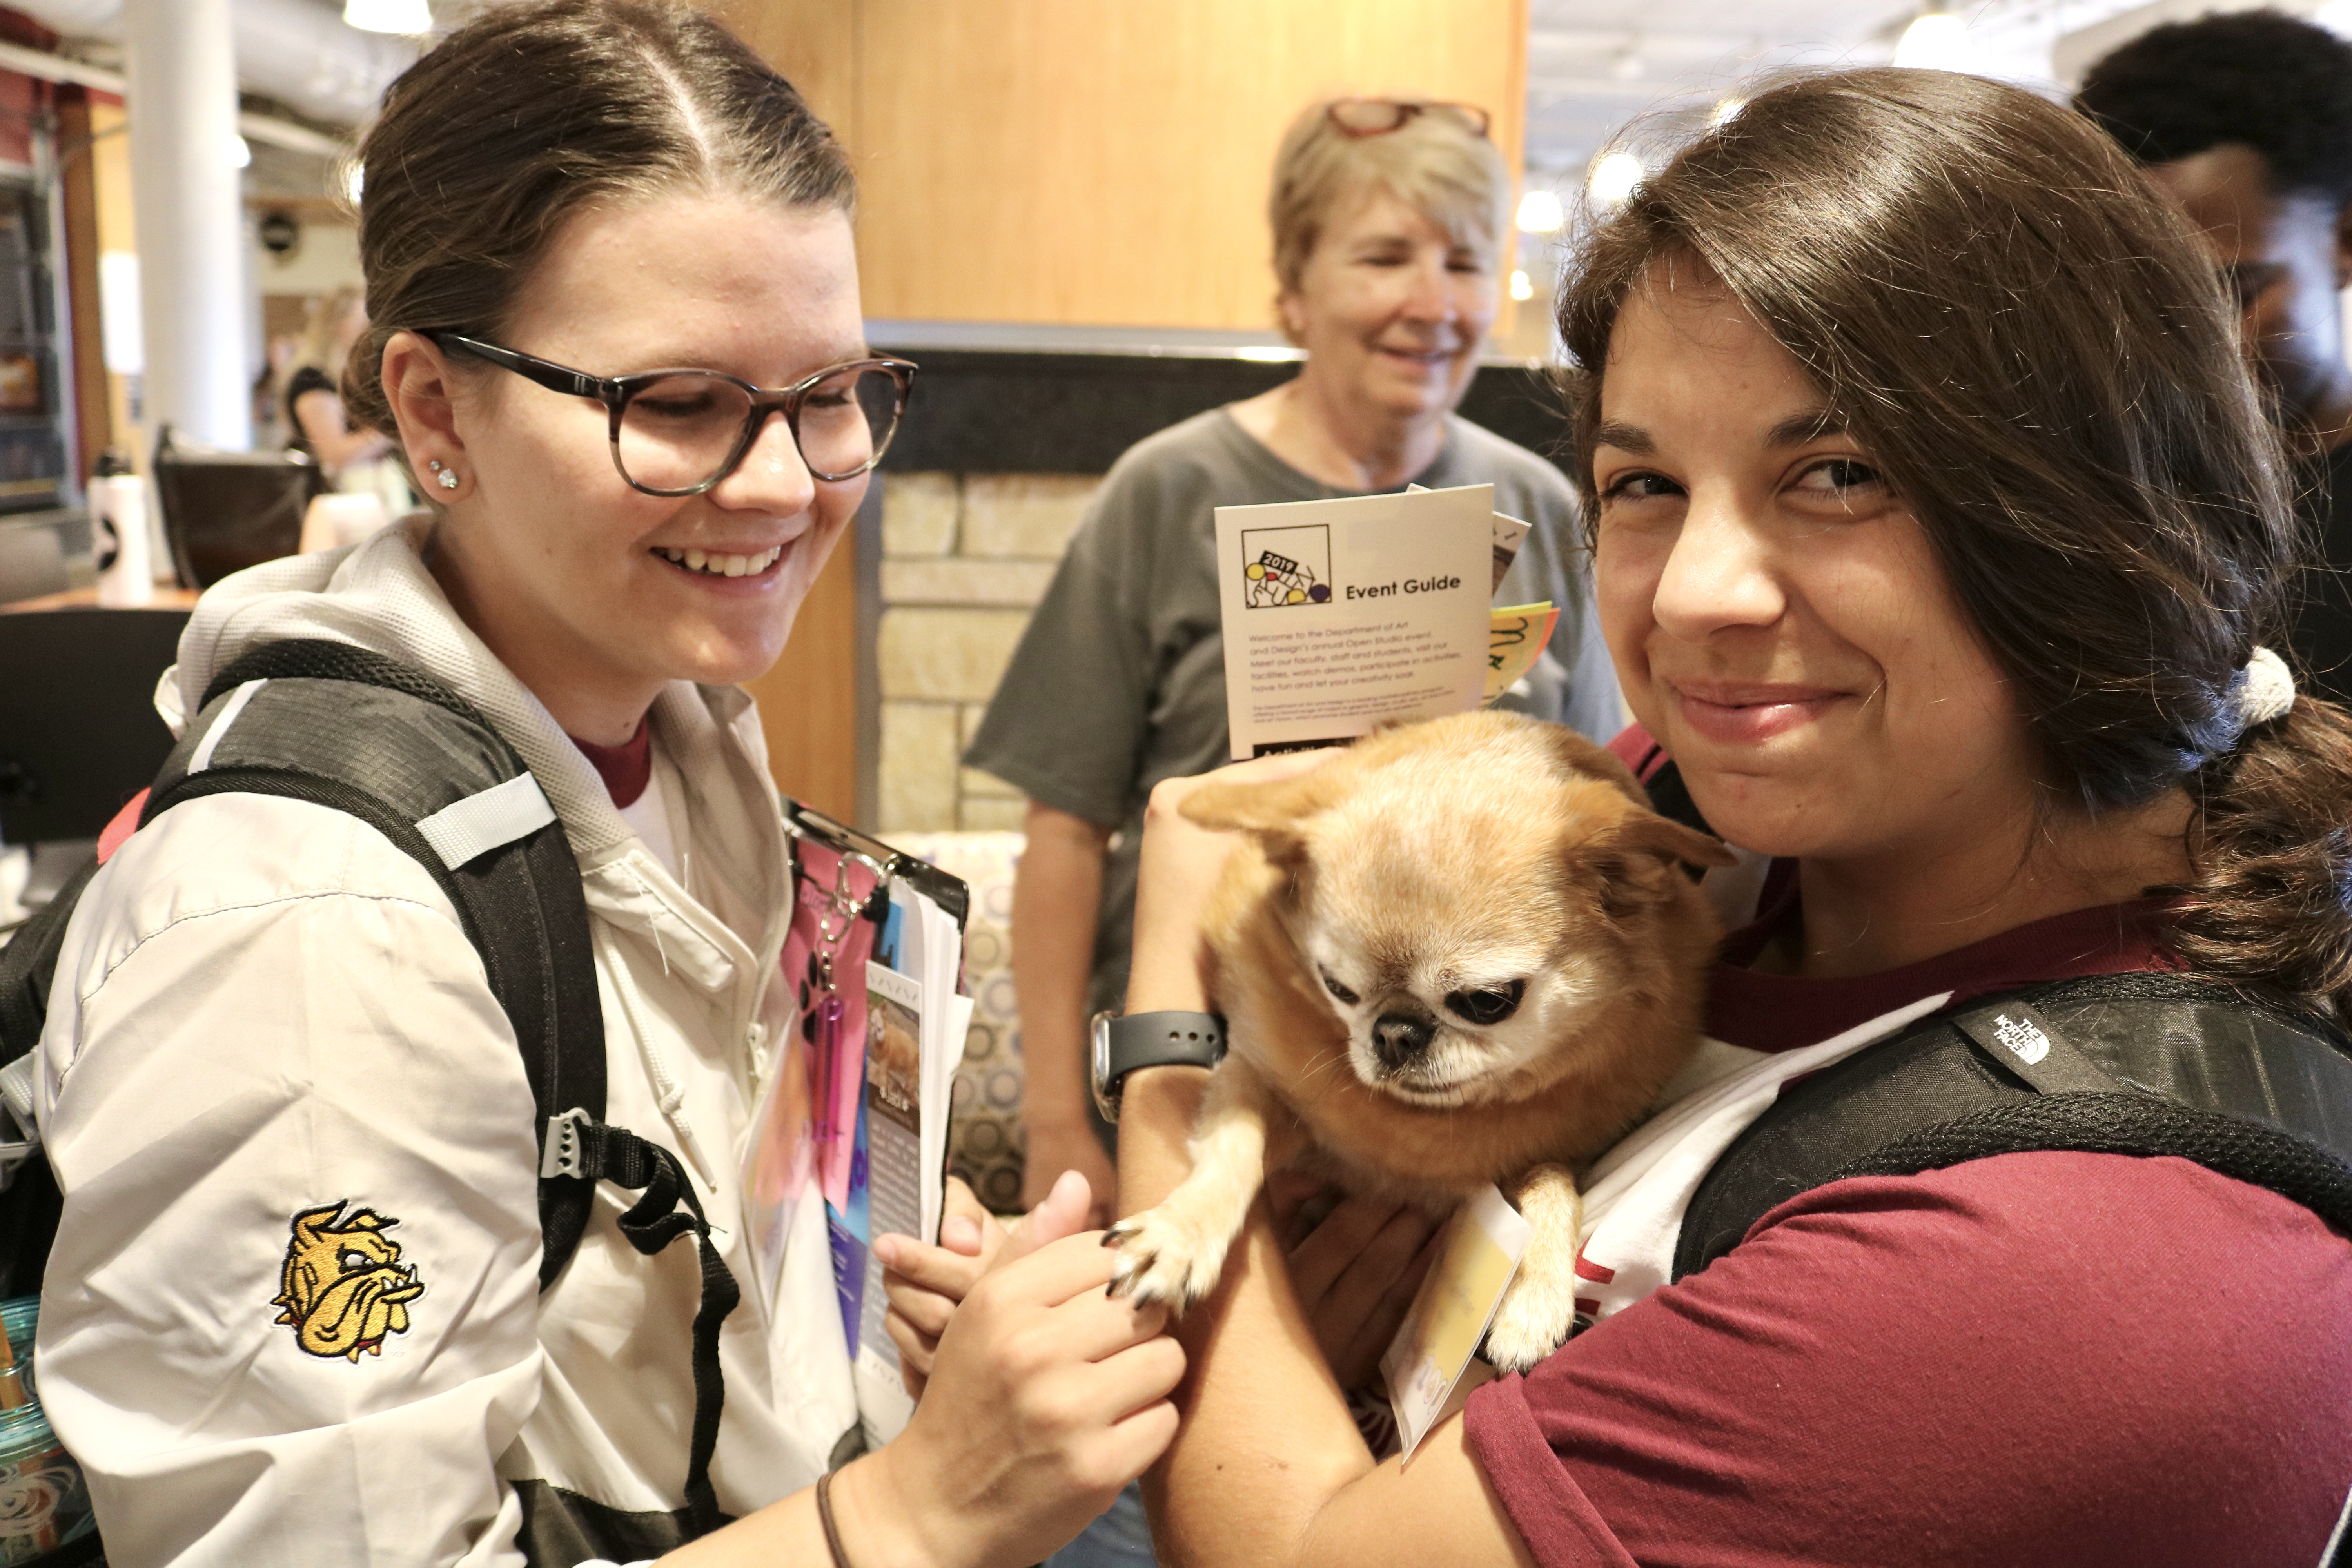 Two event student volunteers holding a cute dog!